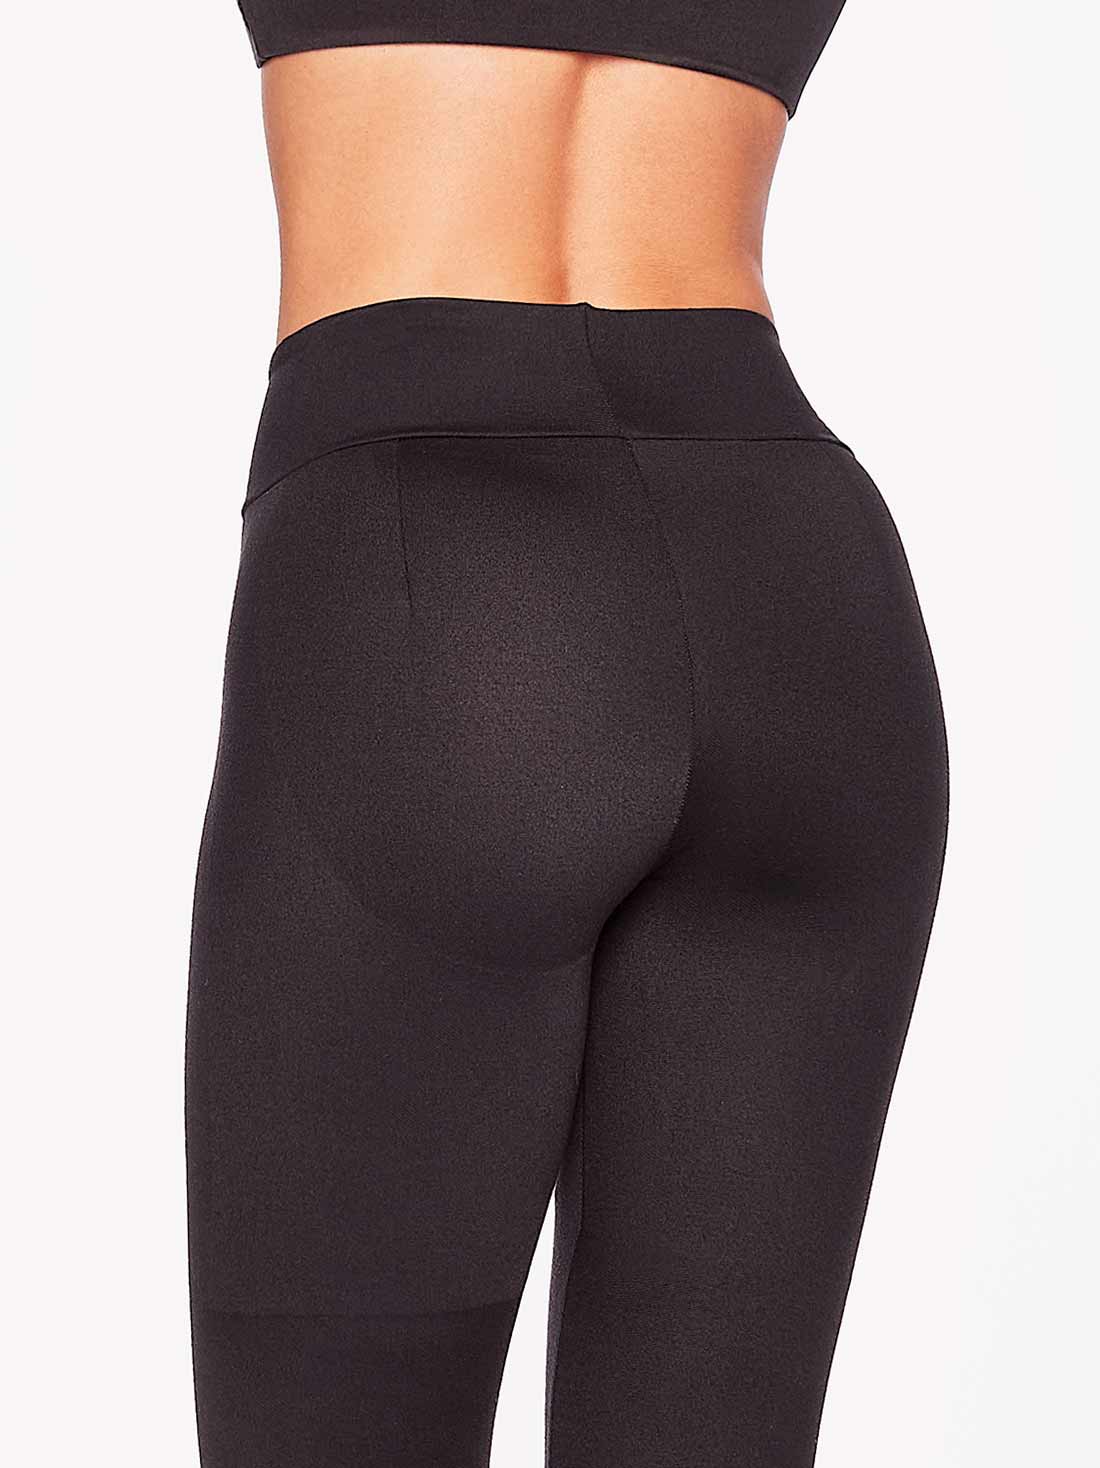 3 for $15 Fengbay Women Capri Leggings Gray Butt Lift Size Small New with  Tags - $6 New With Tags - From Roland